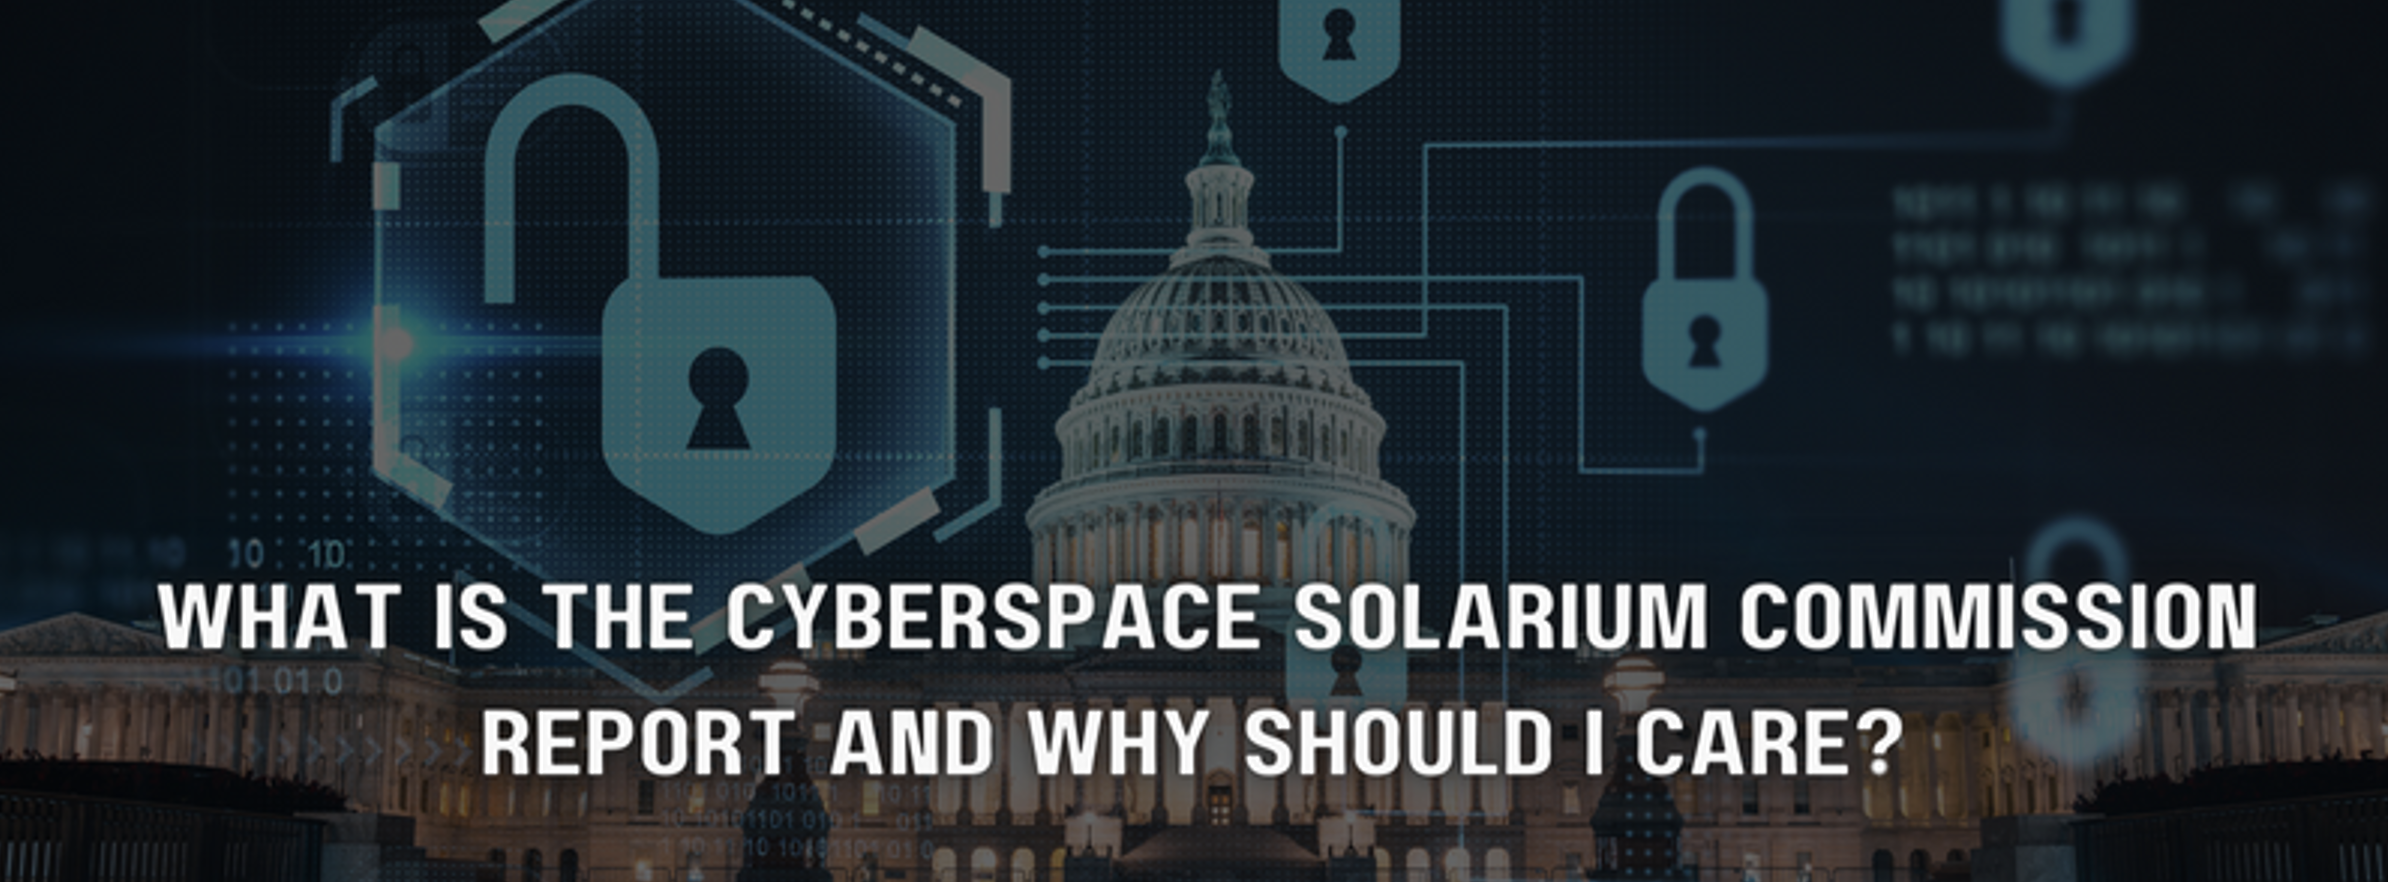 What is the Cyberspace Solarium Commission Report and Why Should I Care?